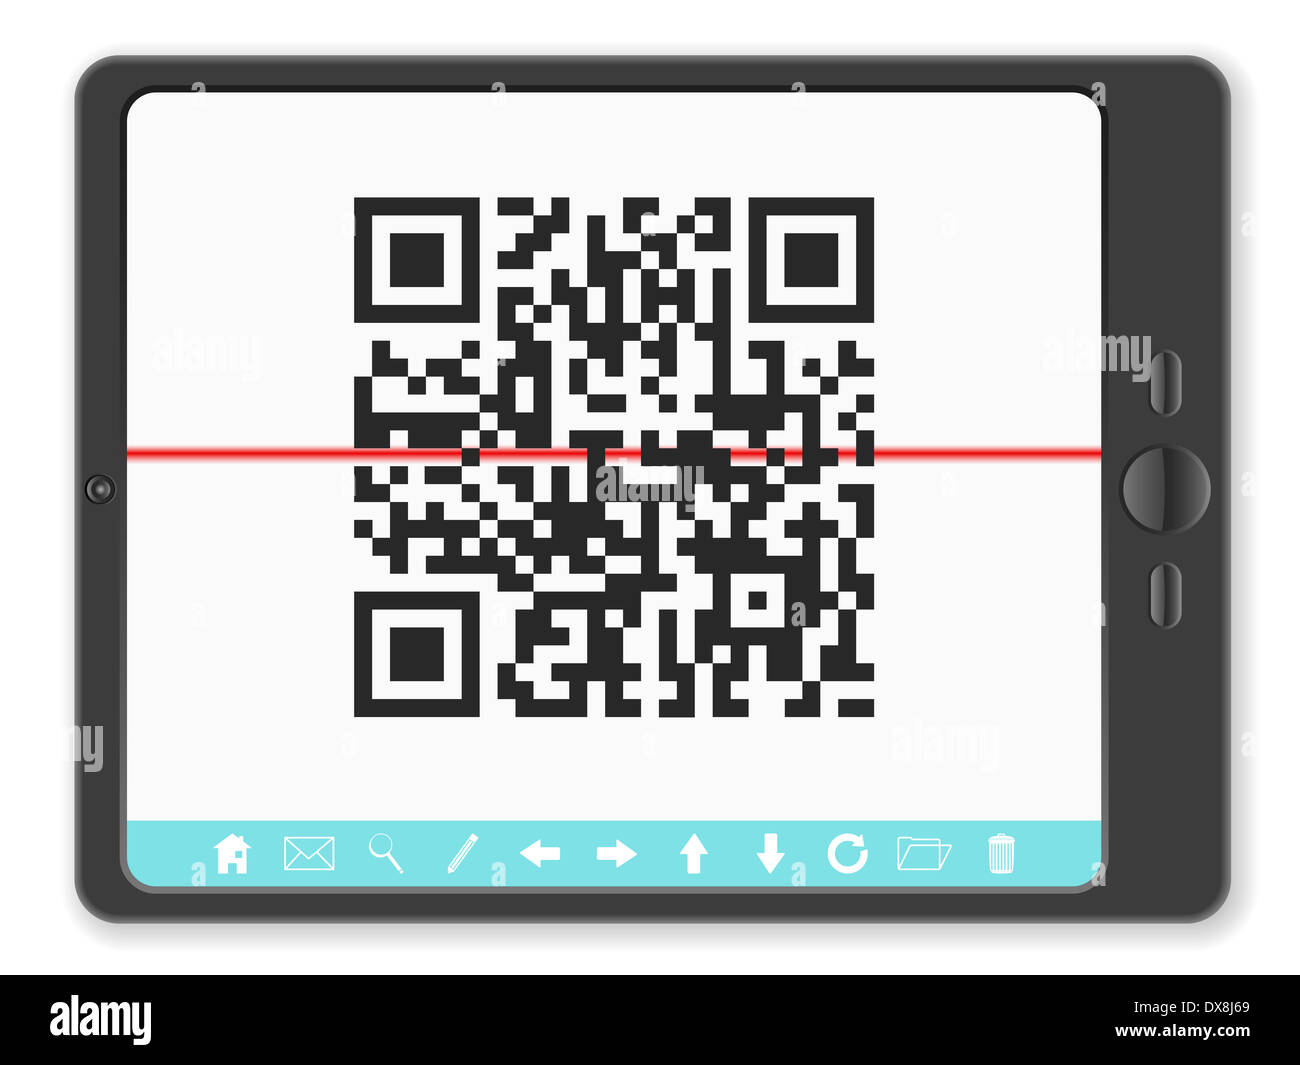 PC tablet with QR code scanner on a white background Stock Photo - Alamy